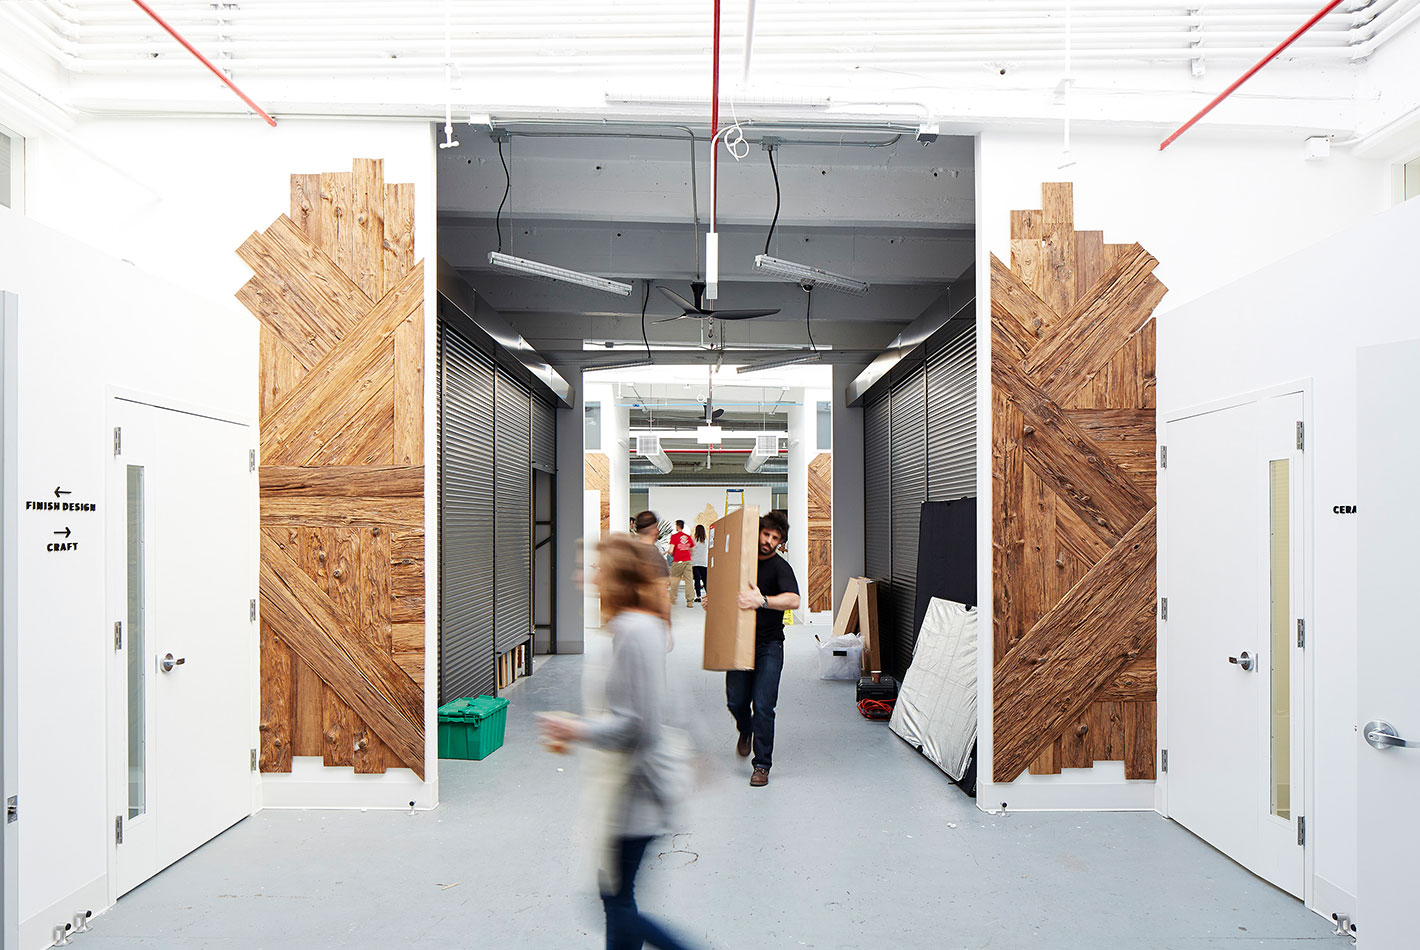 The interior entrance to West Elm's Maker's Studio are covered in signature wood paneling